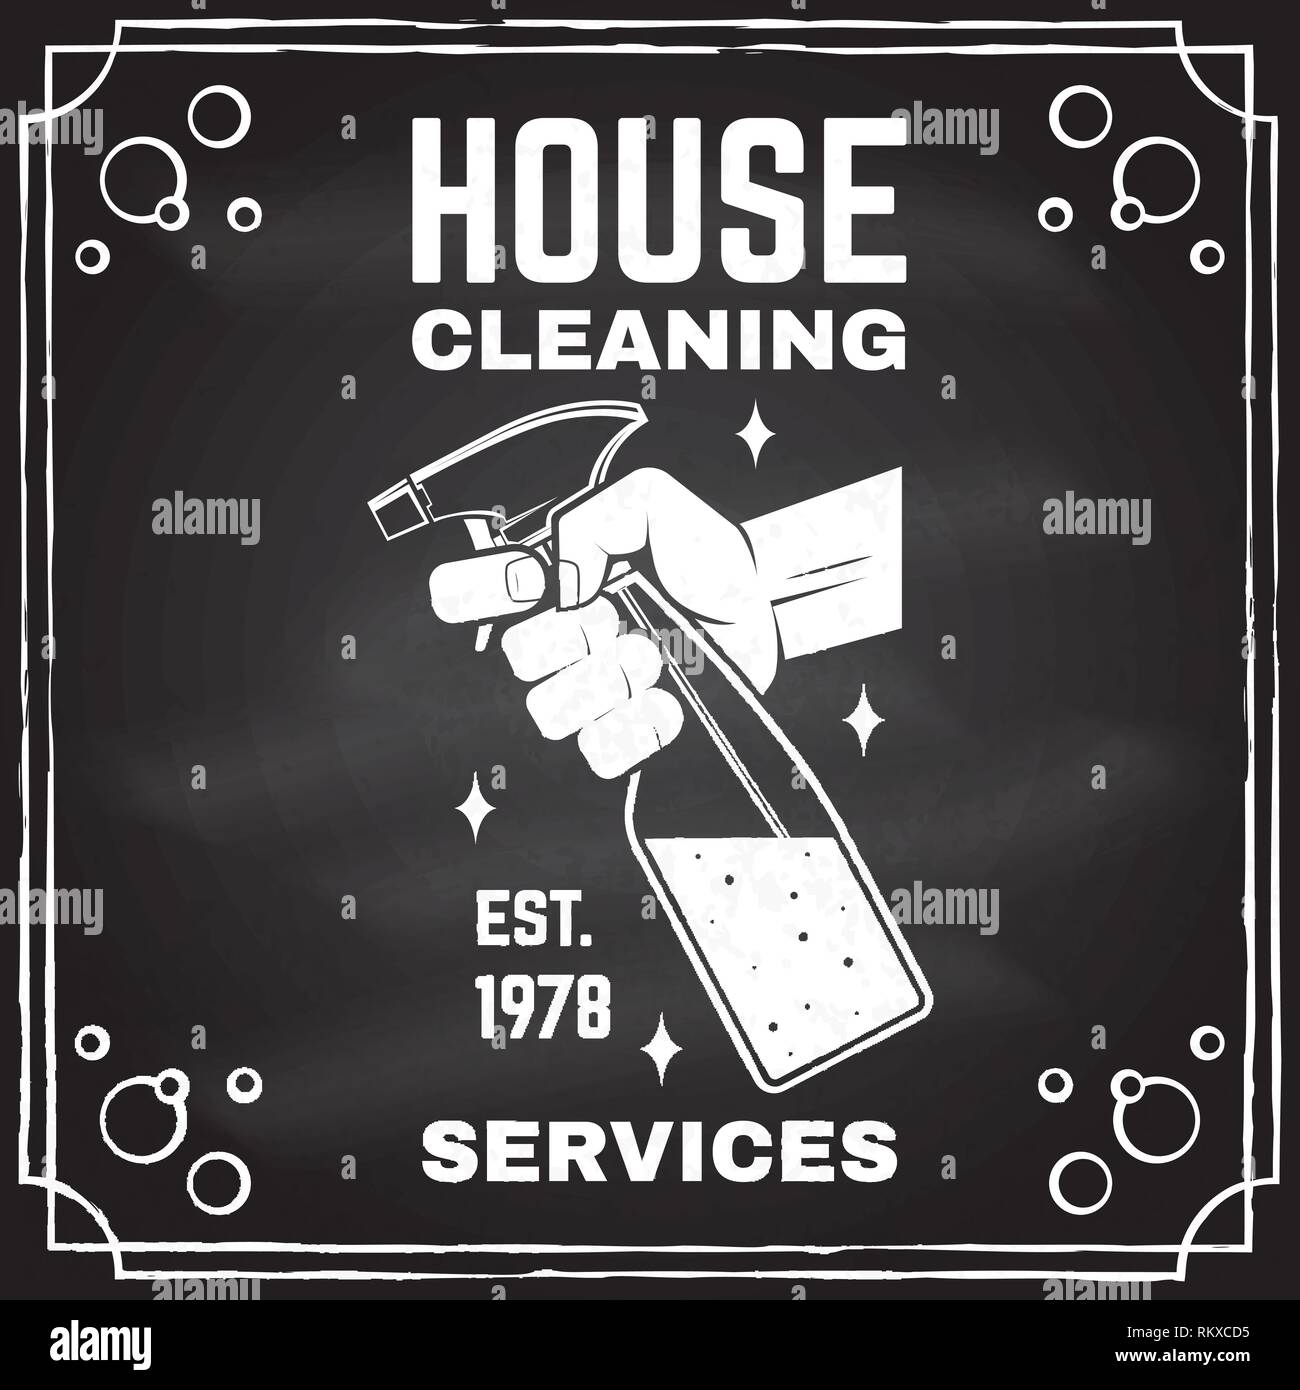 Cleaning company badge, emblem. Vector illustration. Concept for shirt, print, stamp or tee. Vintage typography design with cleaning equipments. Cleaning service sign for company related business Stock Vector